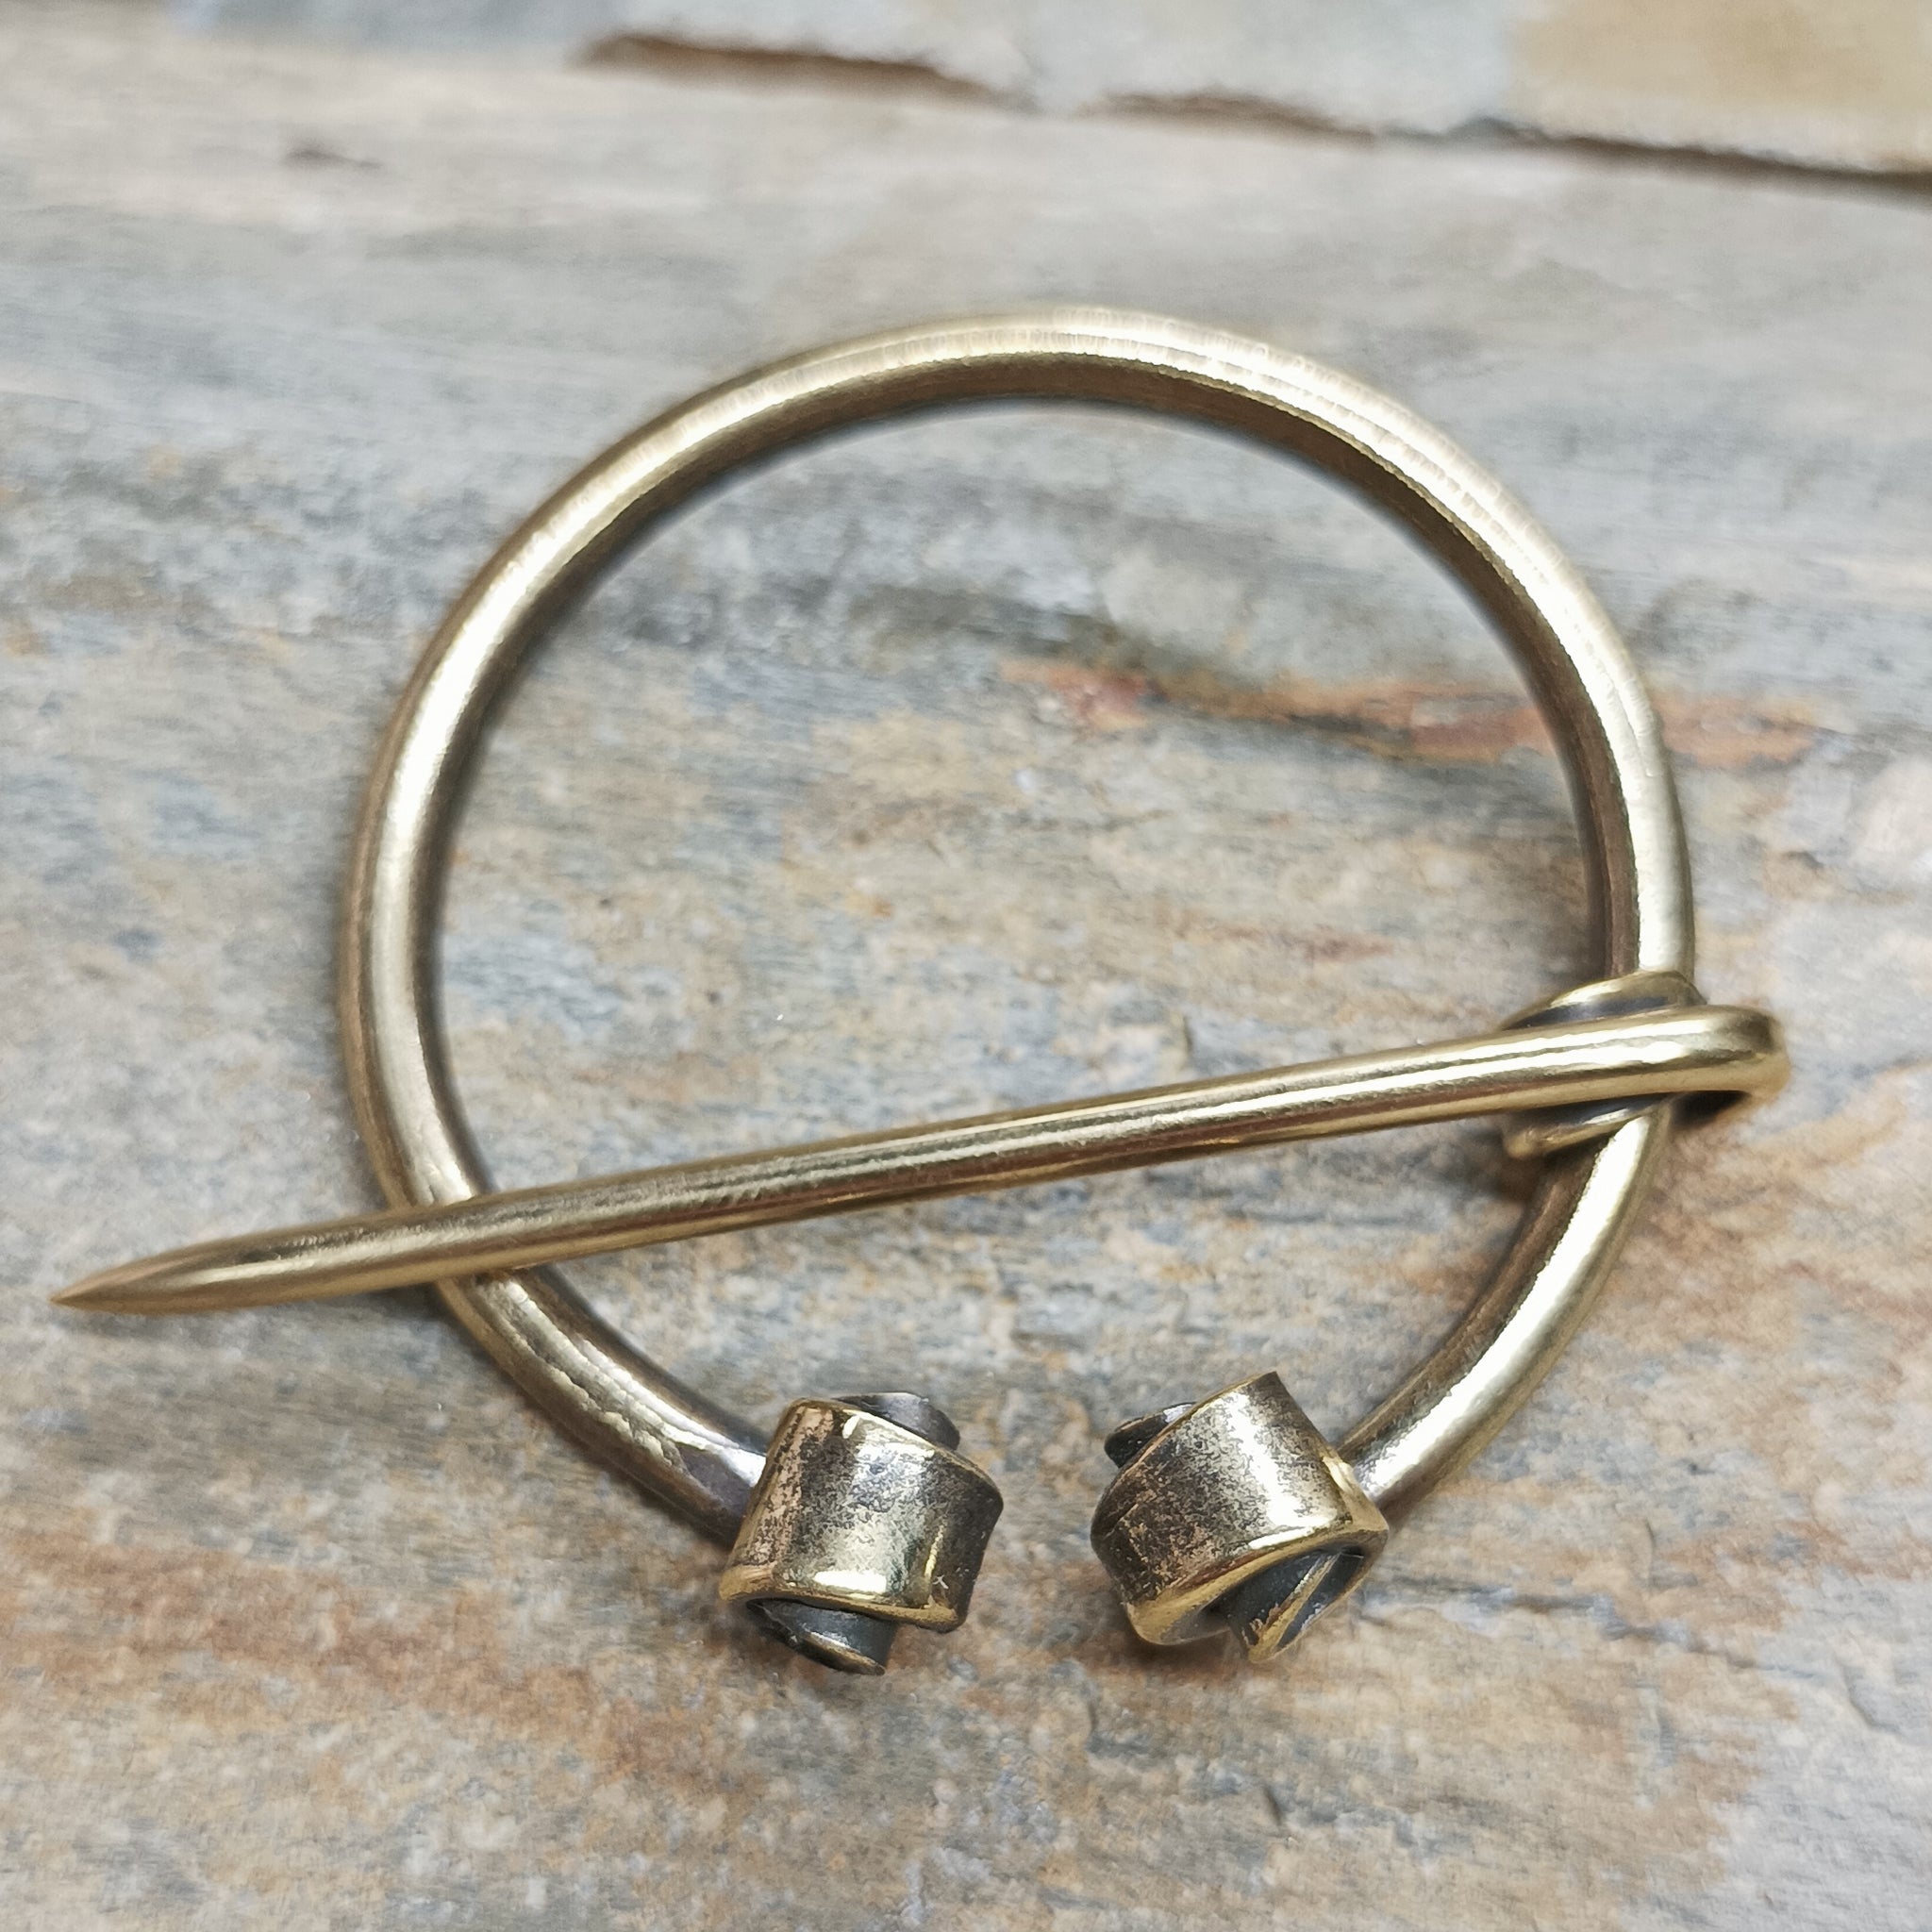 50mm Brass Cloak Pin / Clothes Pin on Rock